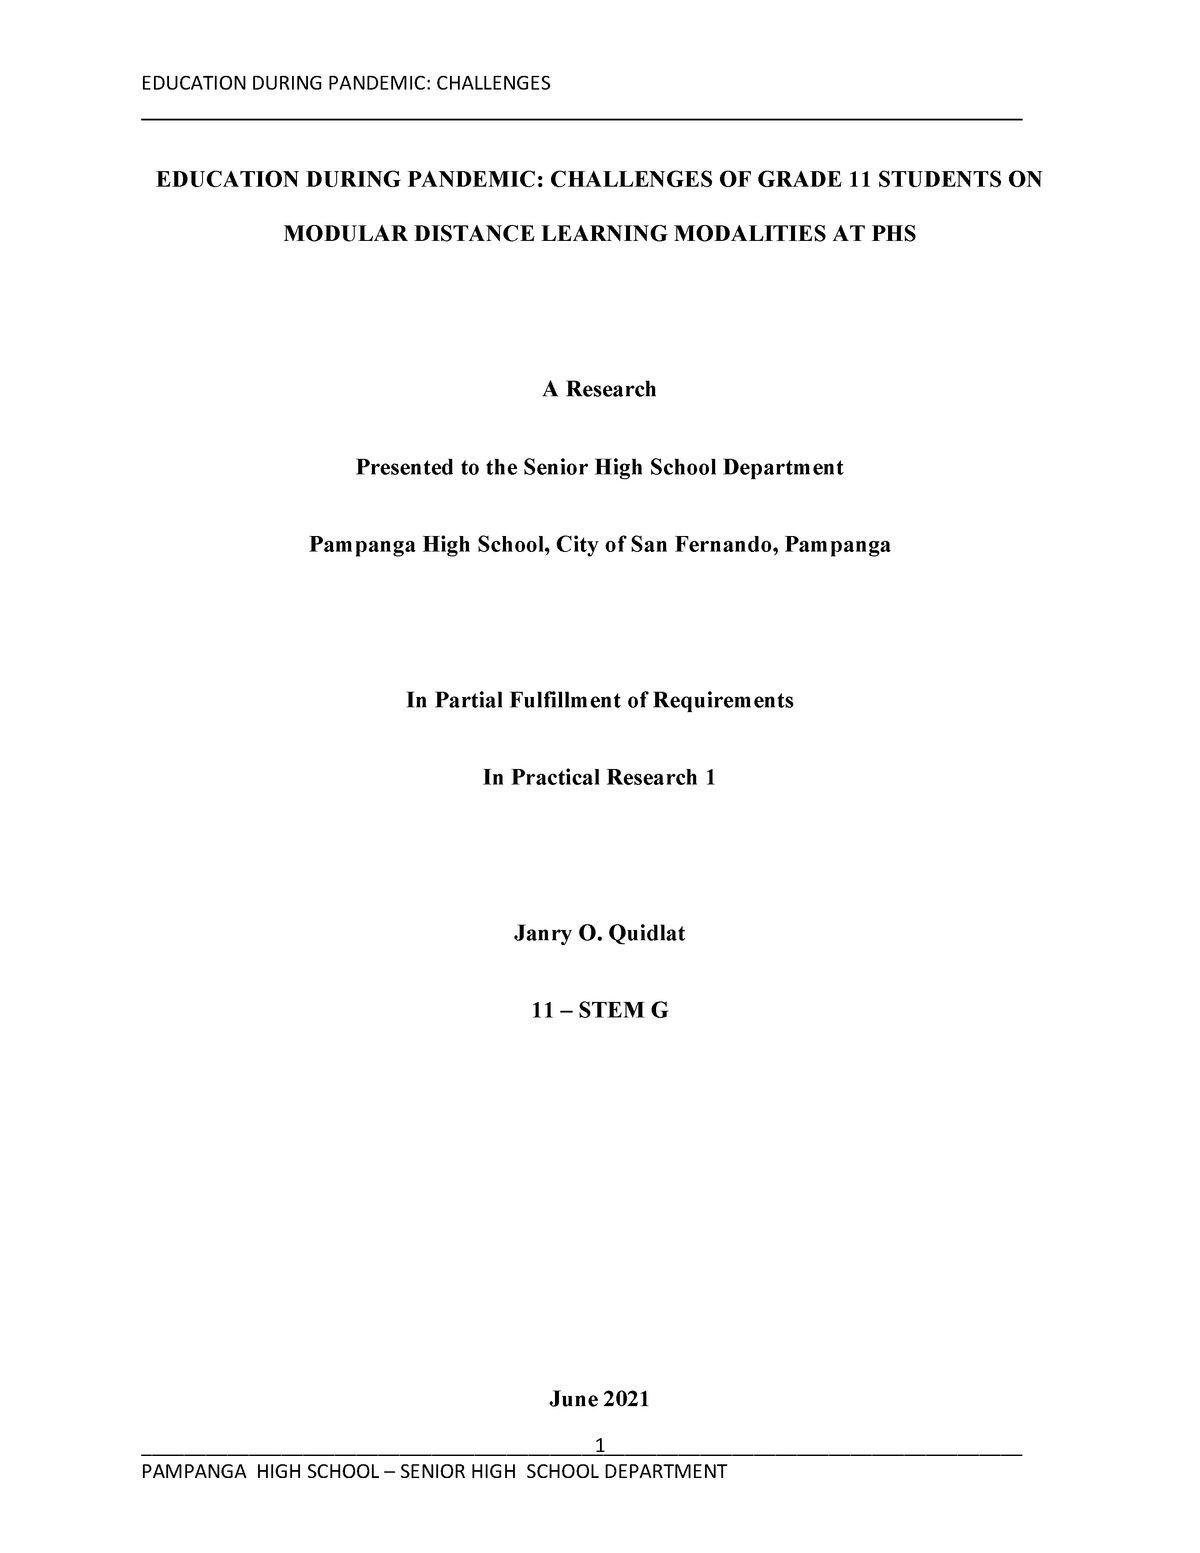 research paper about distance learning in the philippines